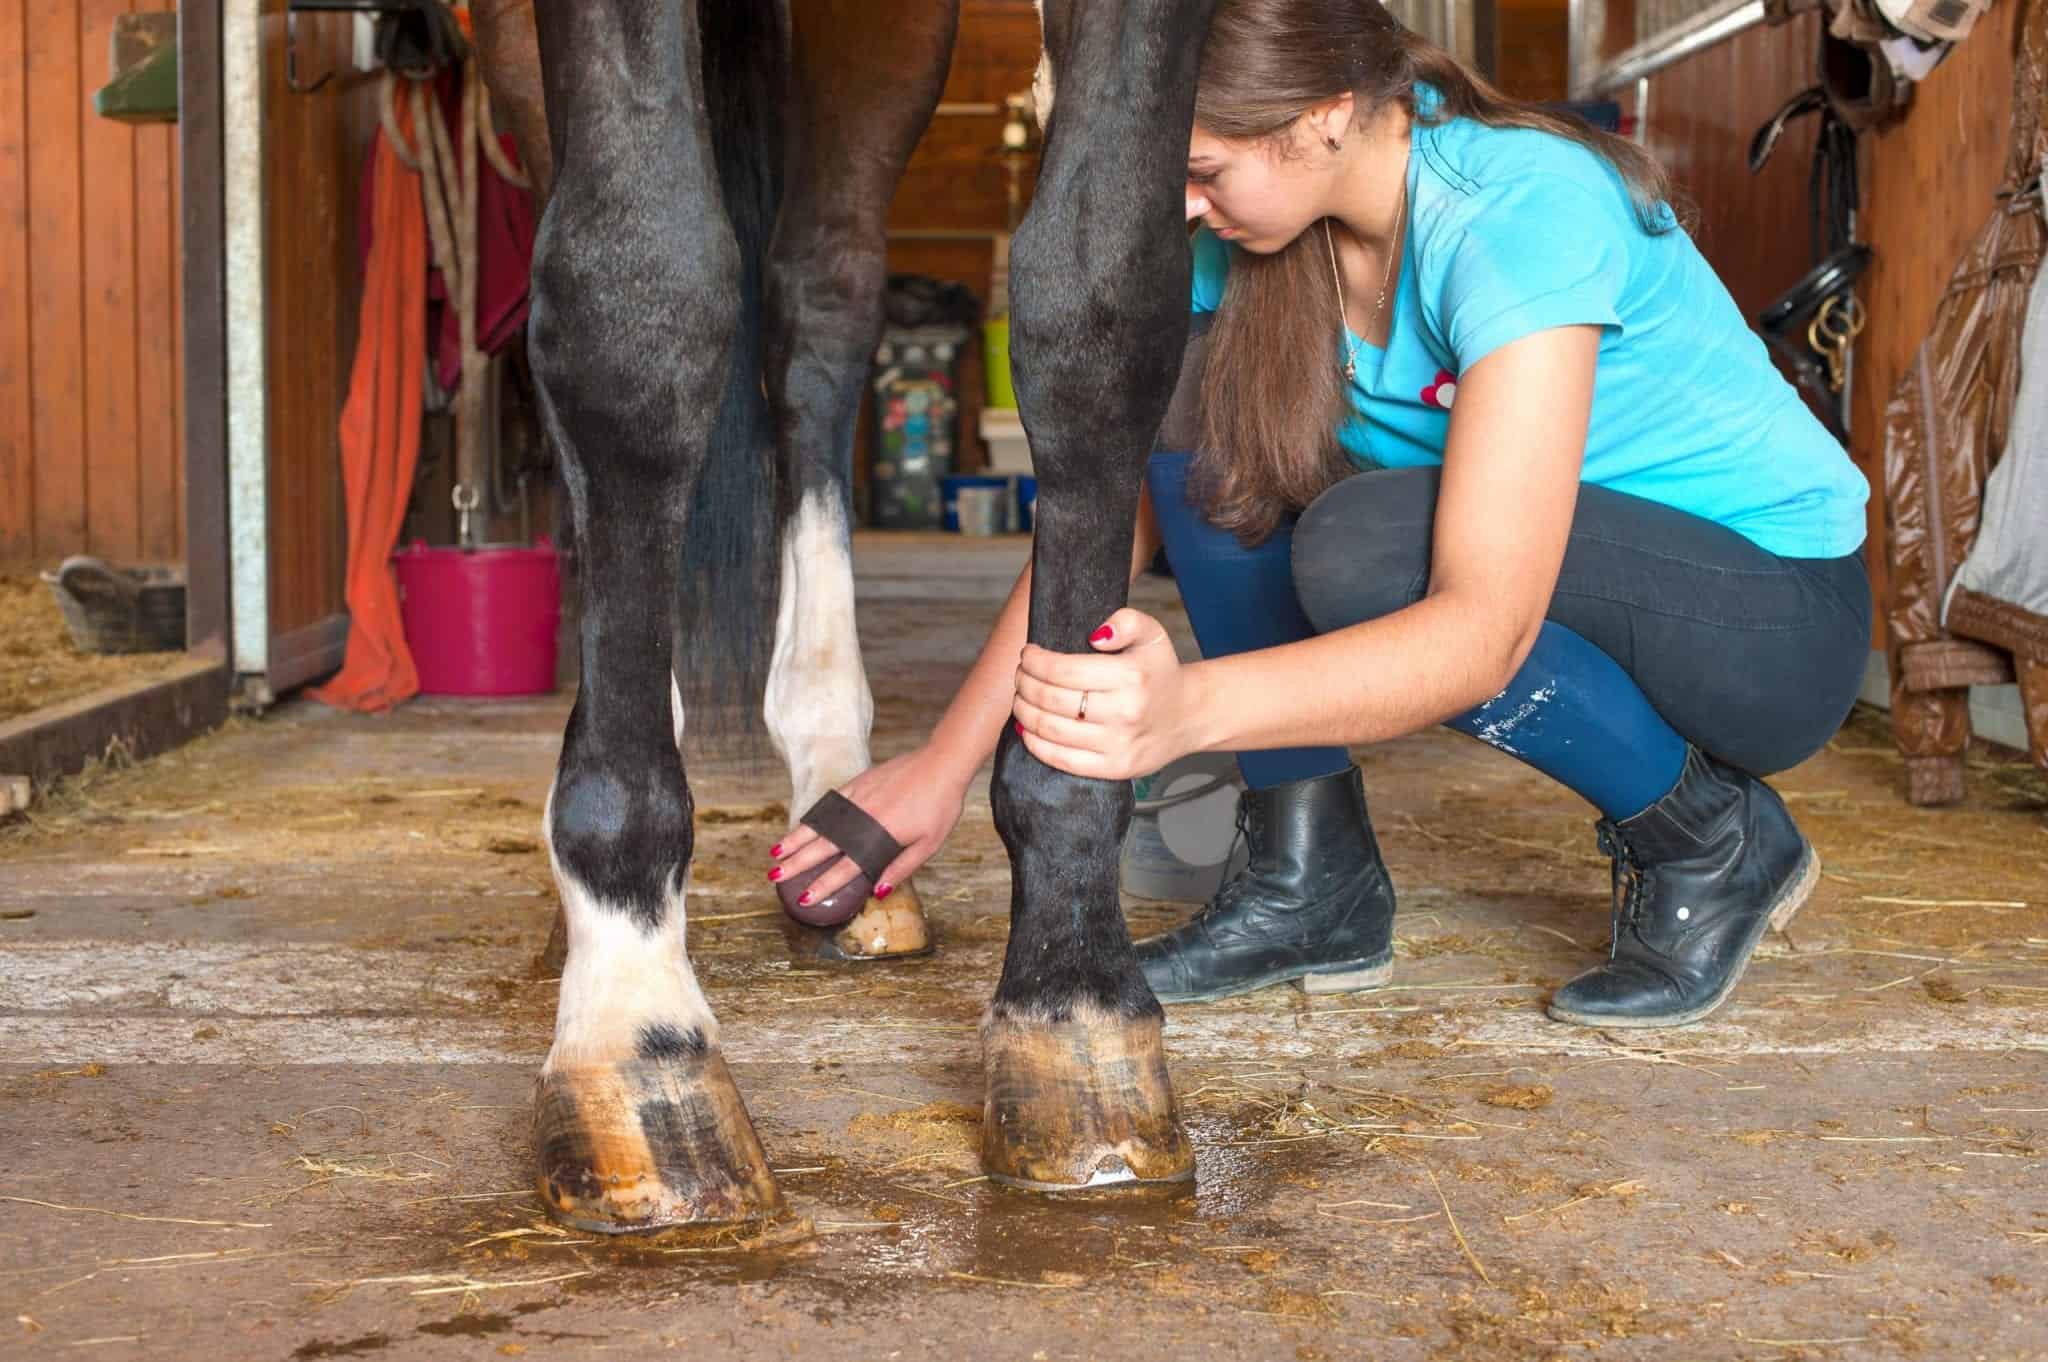 Owner horsewoman taking care of chestnut horse hoof. Indoors multicolored horizontal image.